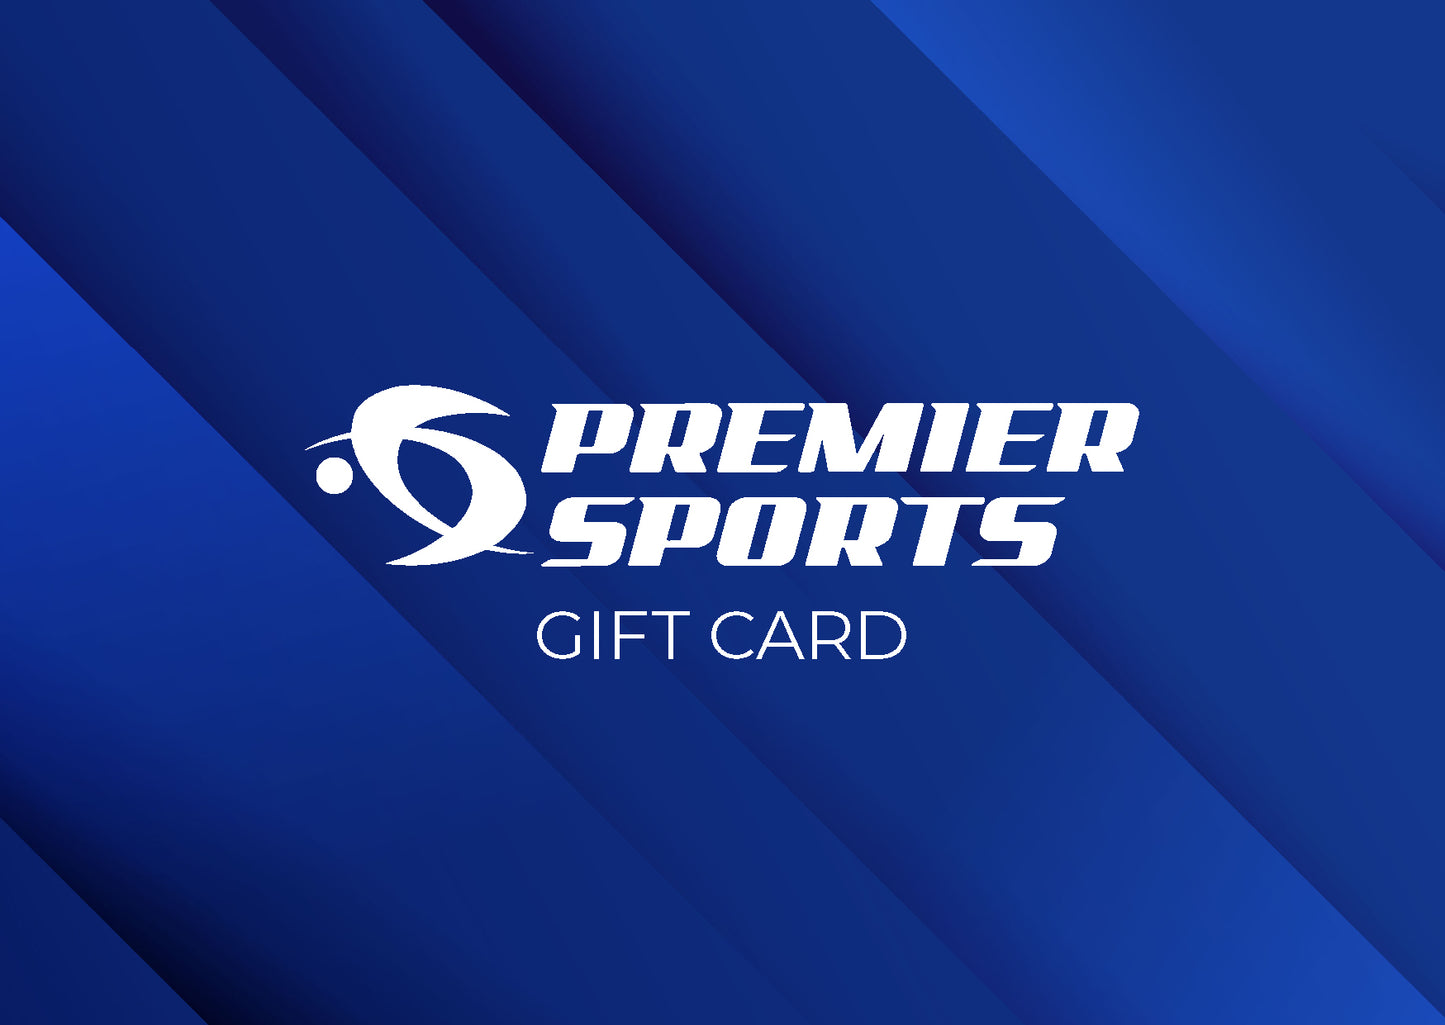 PREMIER SPORTS GIFT CARD (PHYSICAL CARD)